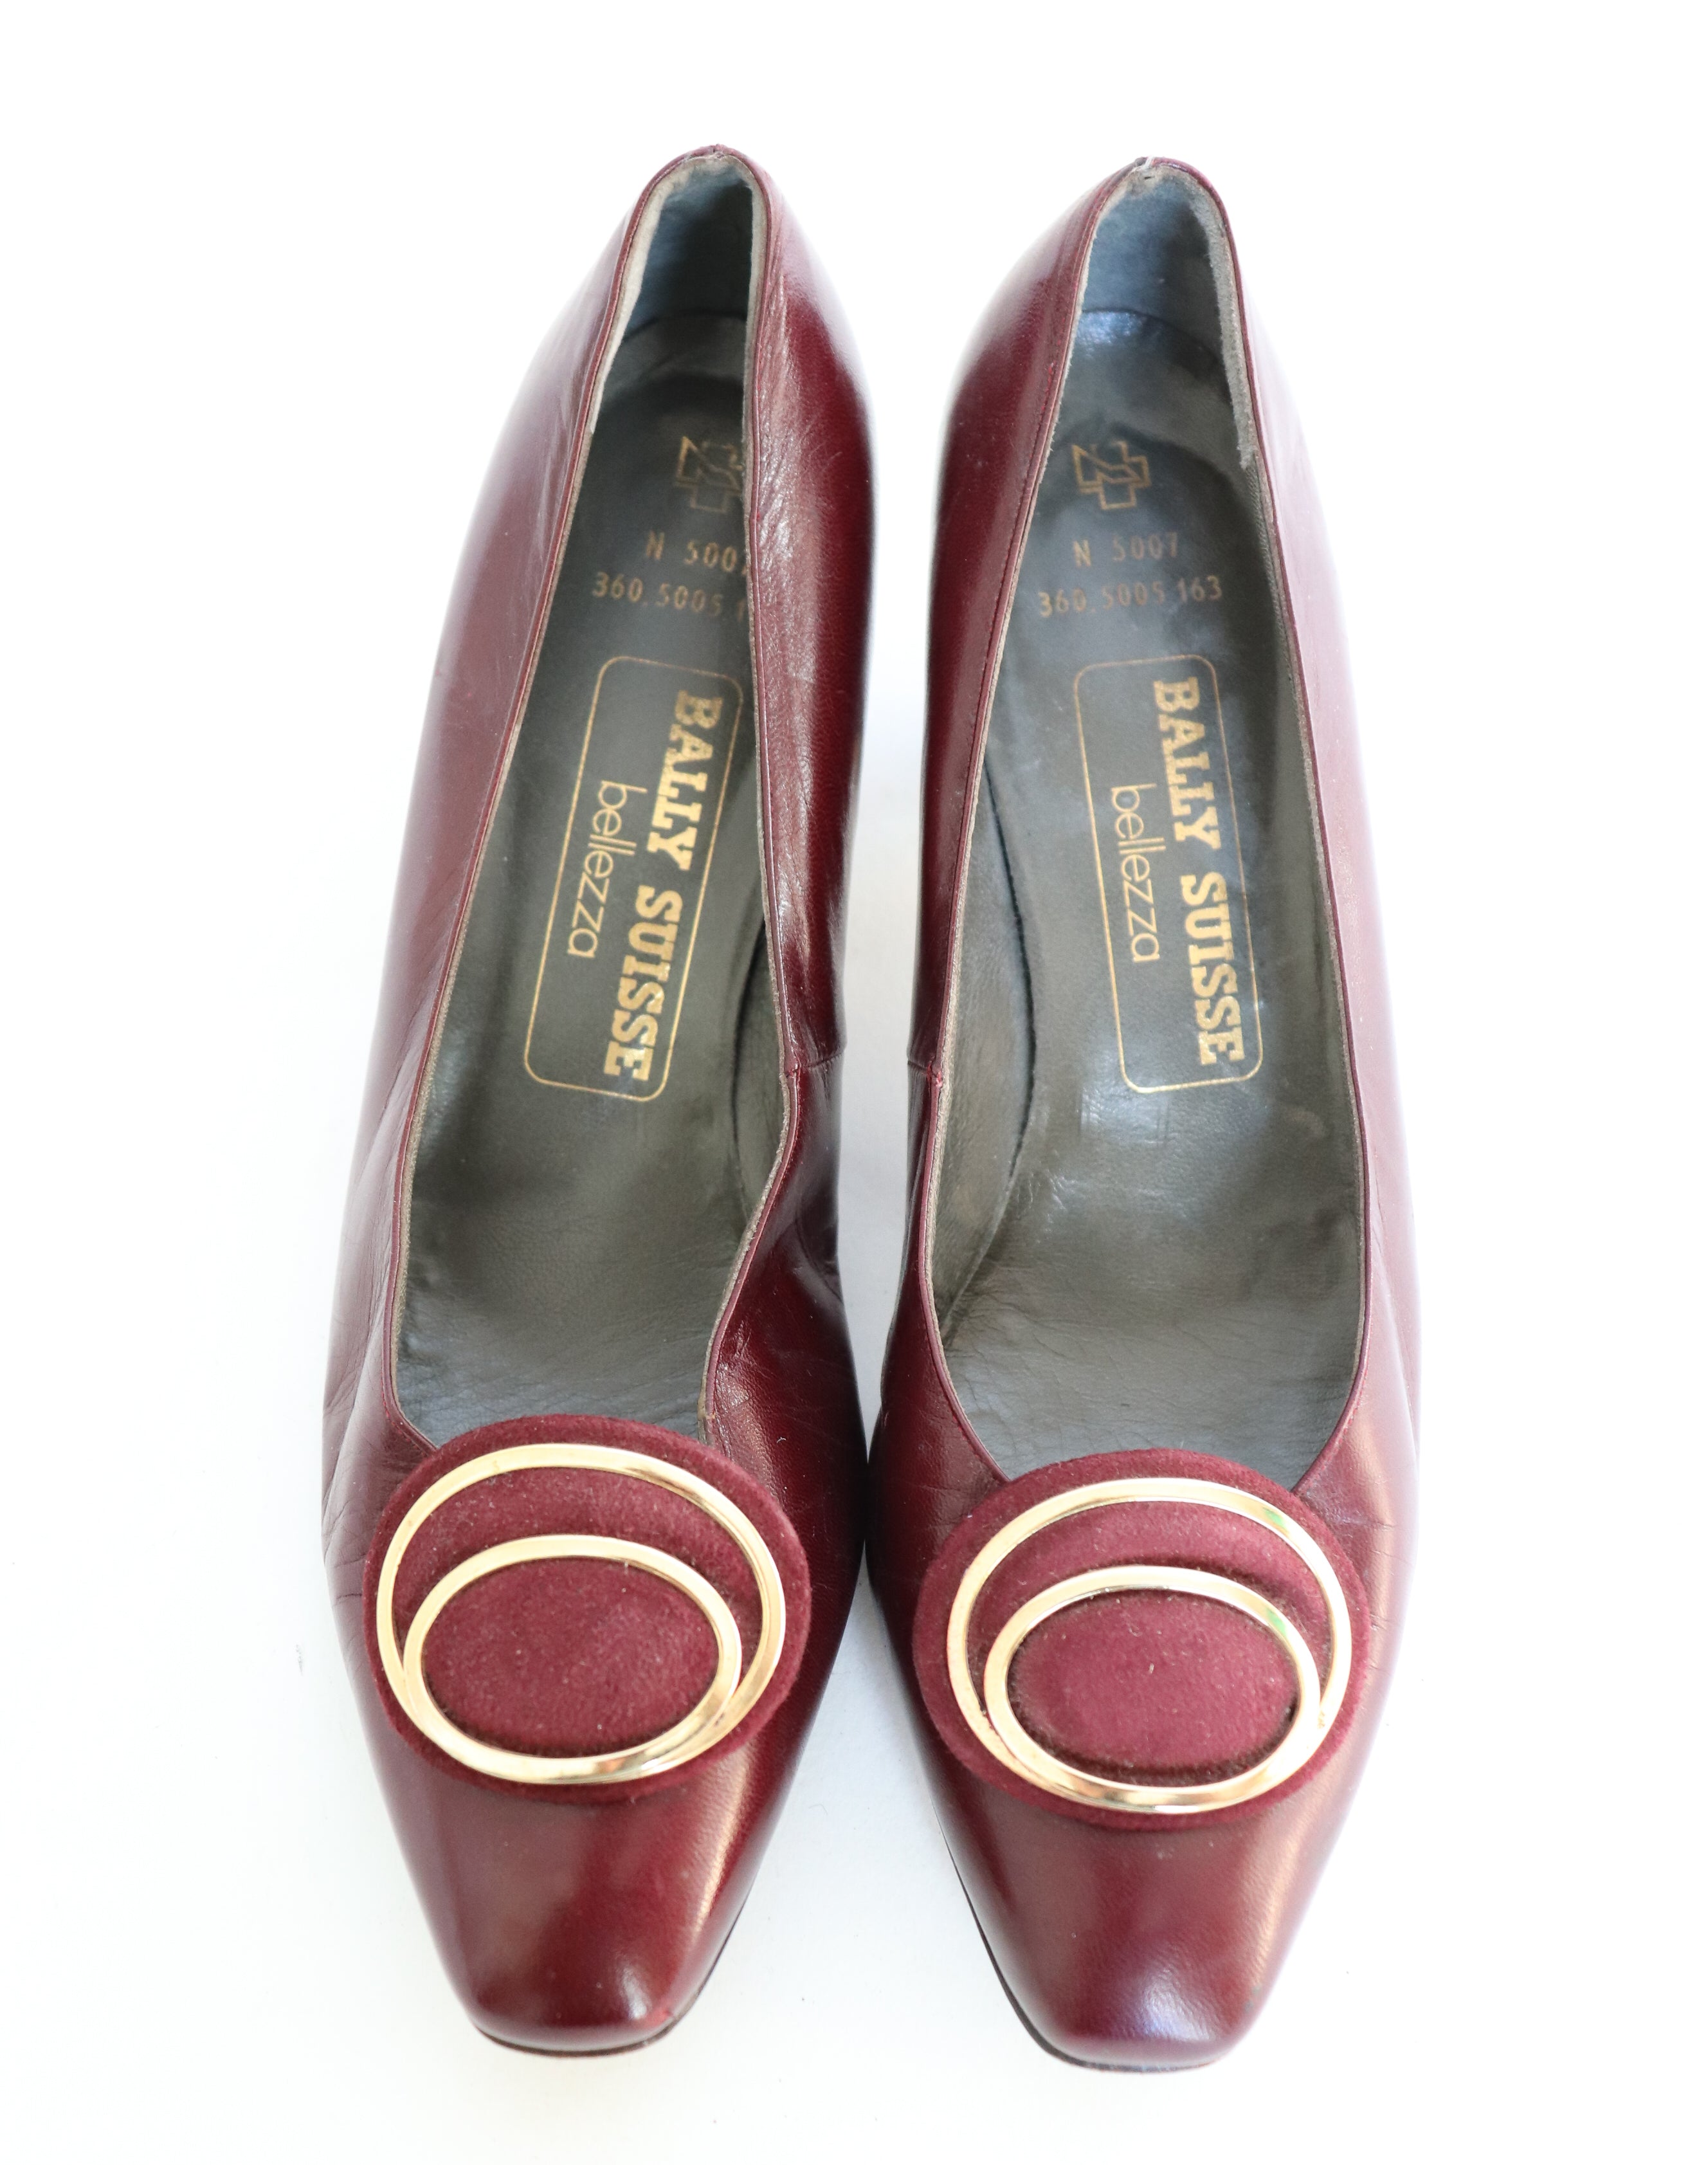 Bally Suisse Leather Shoes - Burgundy Heel Pumps - Label 5 E - Fit 37.5 / 4.5